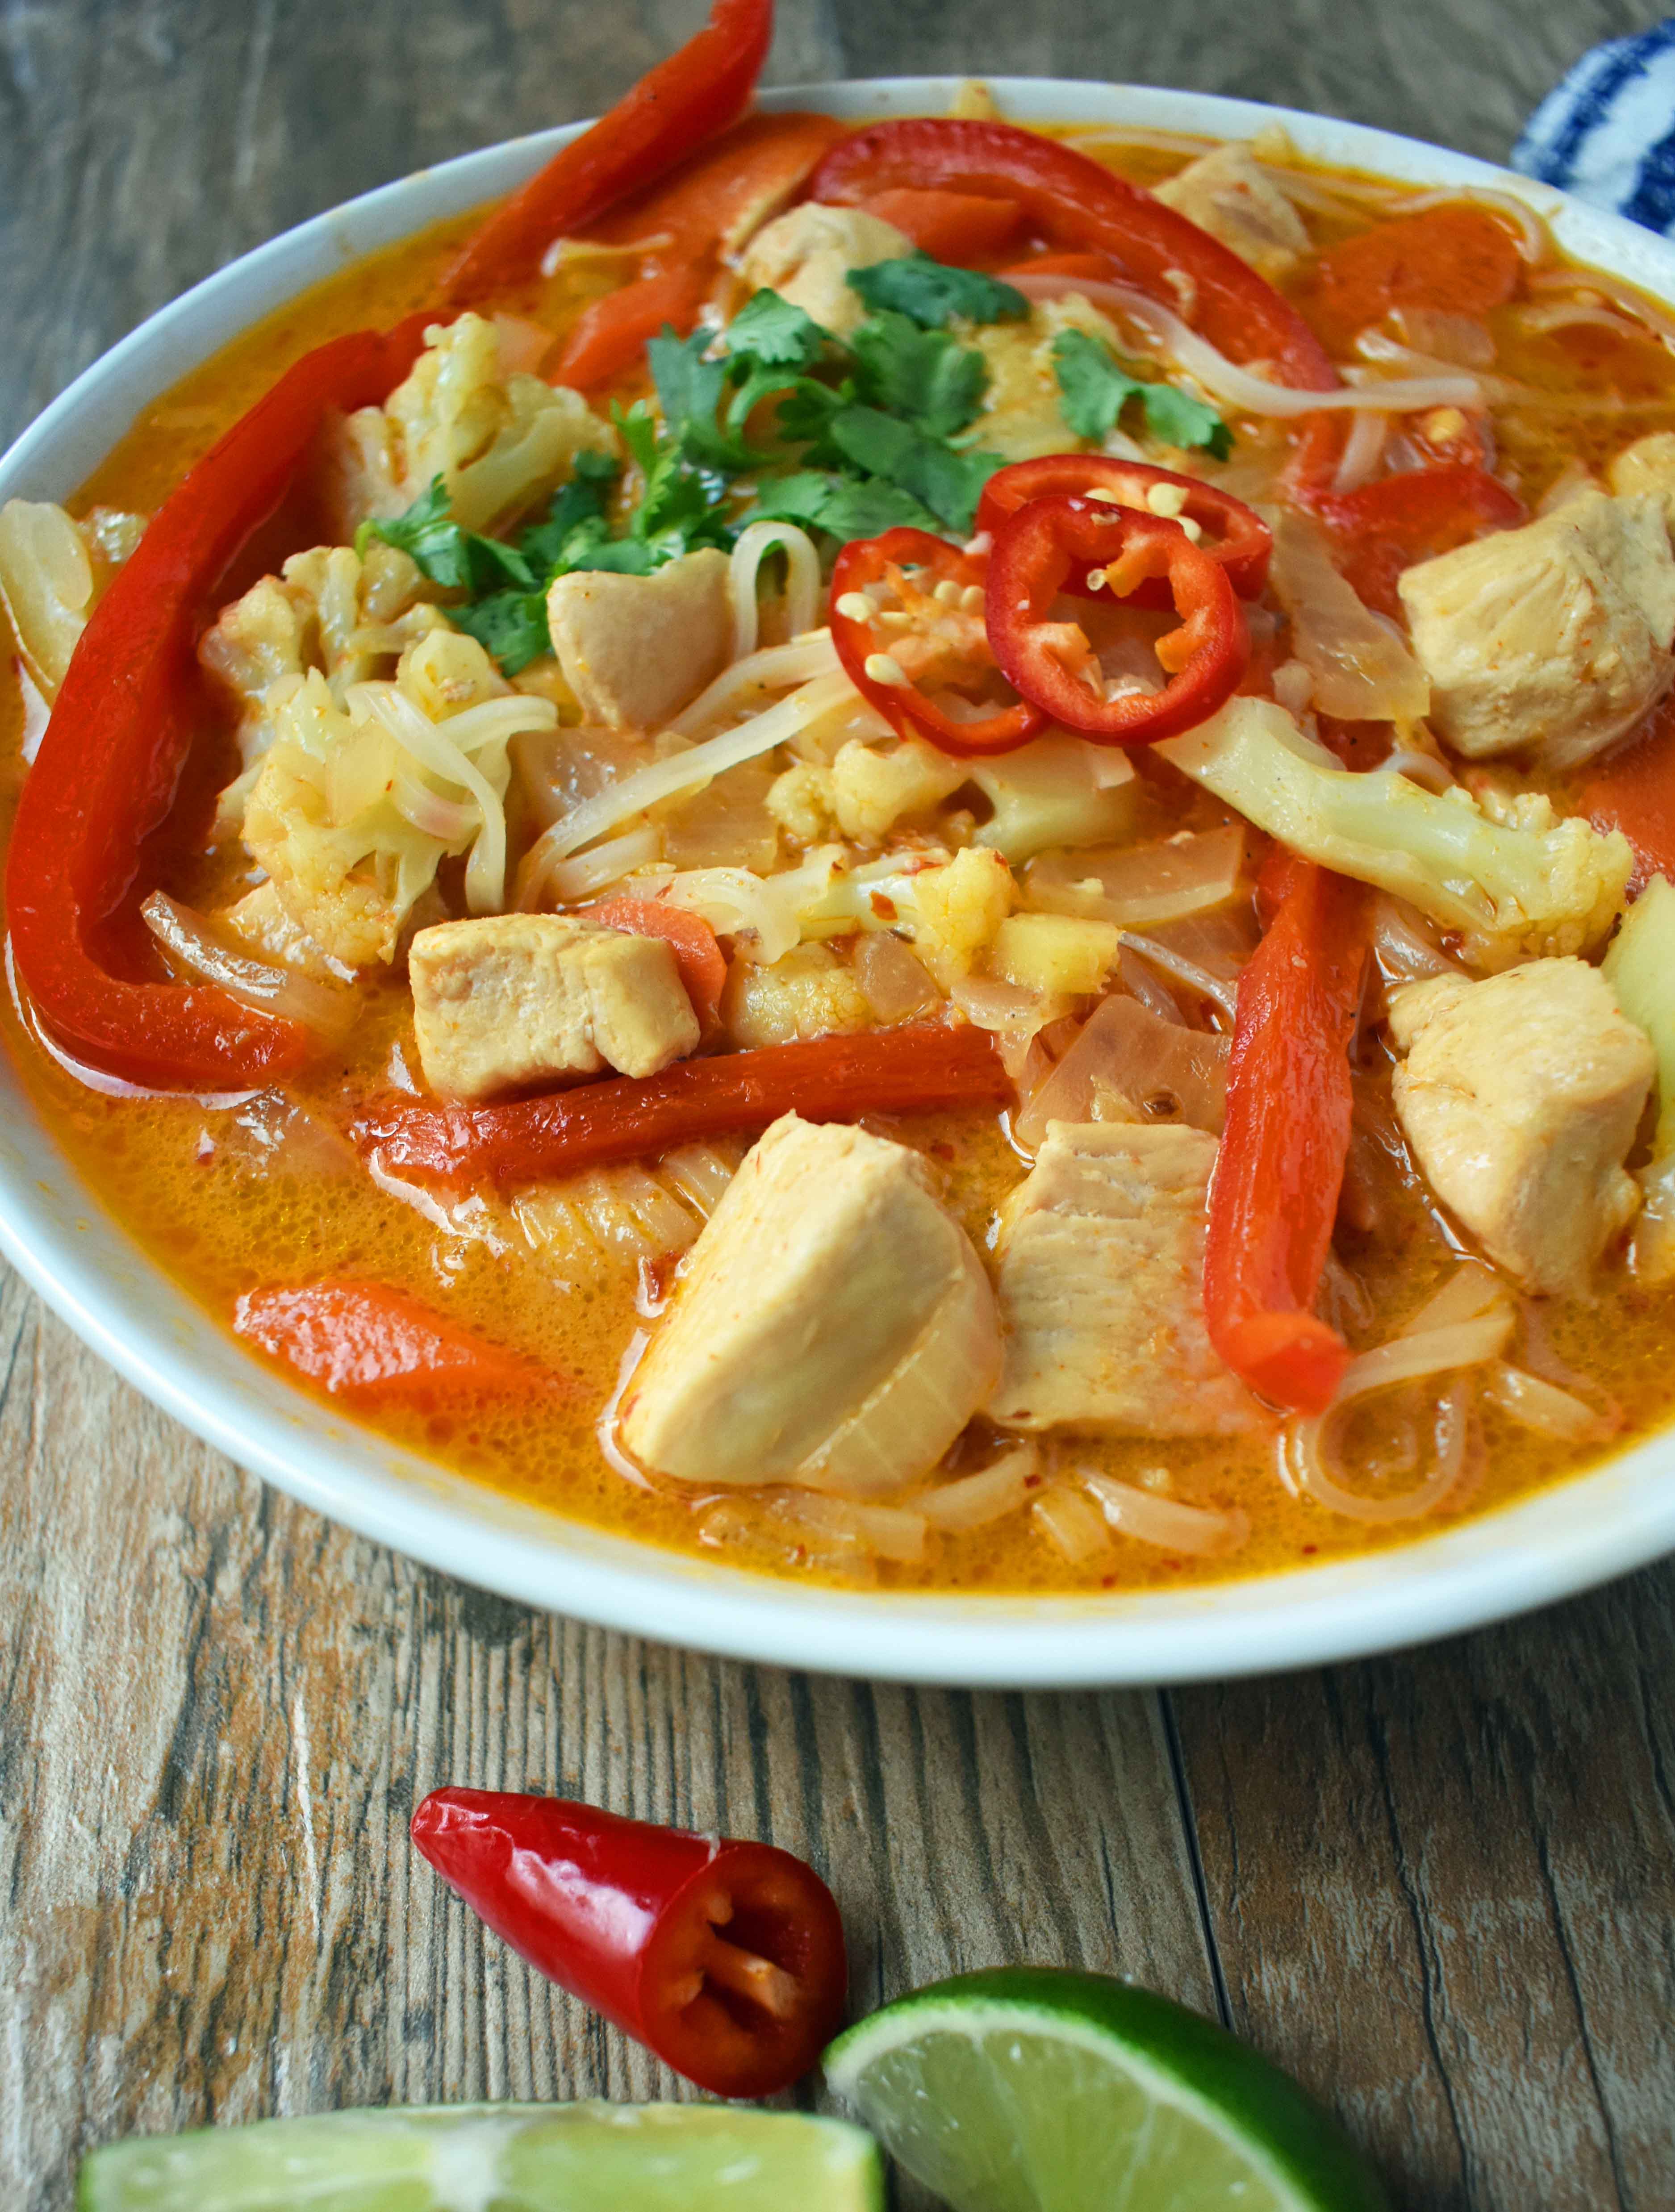 Thai Chicken Noodle Soup. Gluten-free and Dairy-Free nutritious soup that is full of flavor. A rich coconut milk red curry based broth filled with onions, carrots, ginger, cauliflower, and red pepper. A healthy and delicious soup that everyone loves! www.modernhoney.com